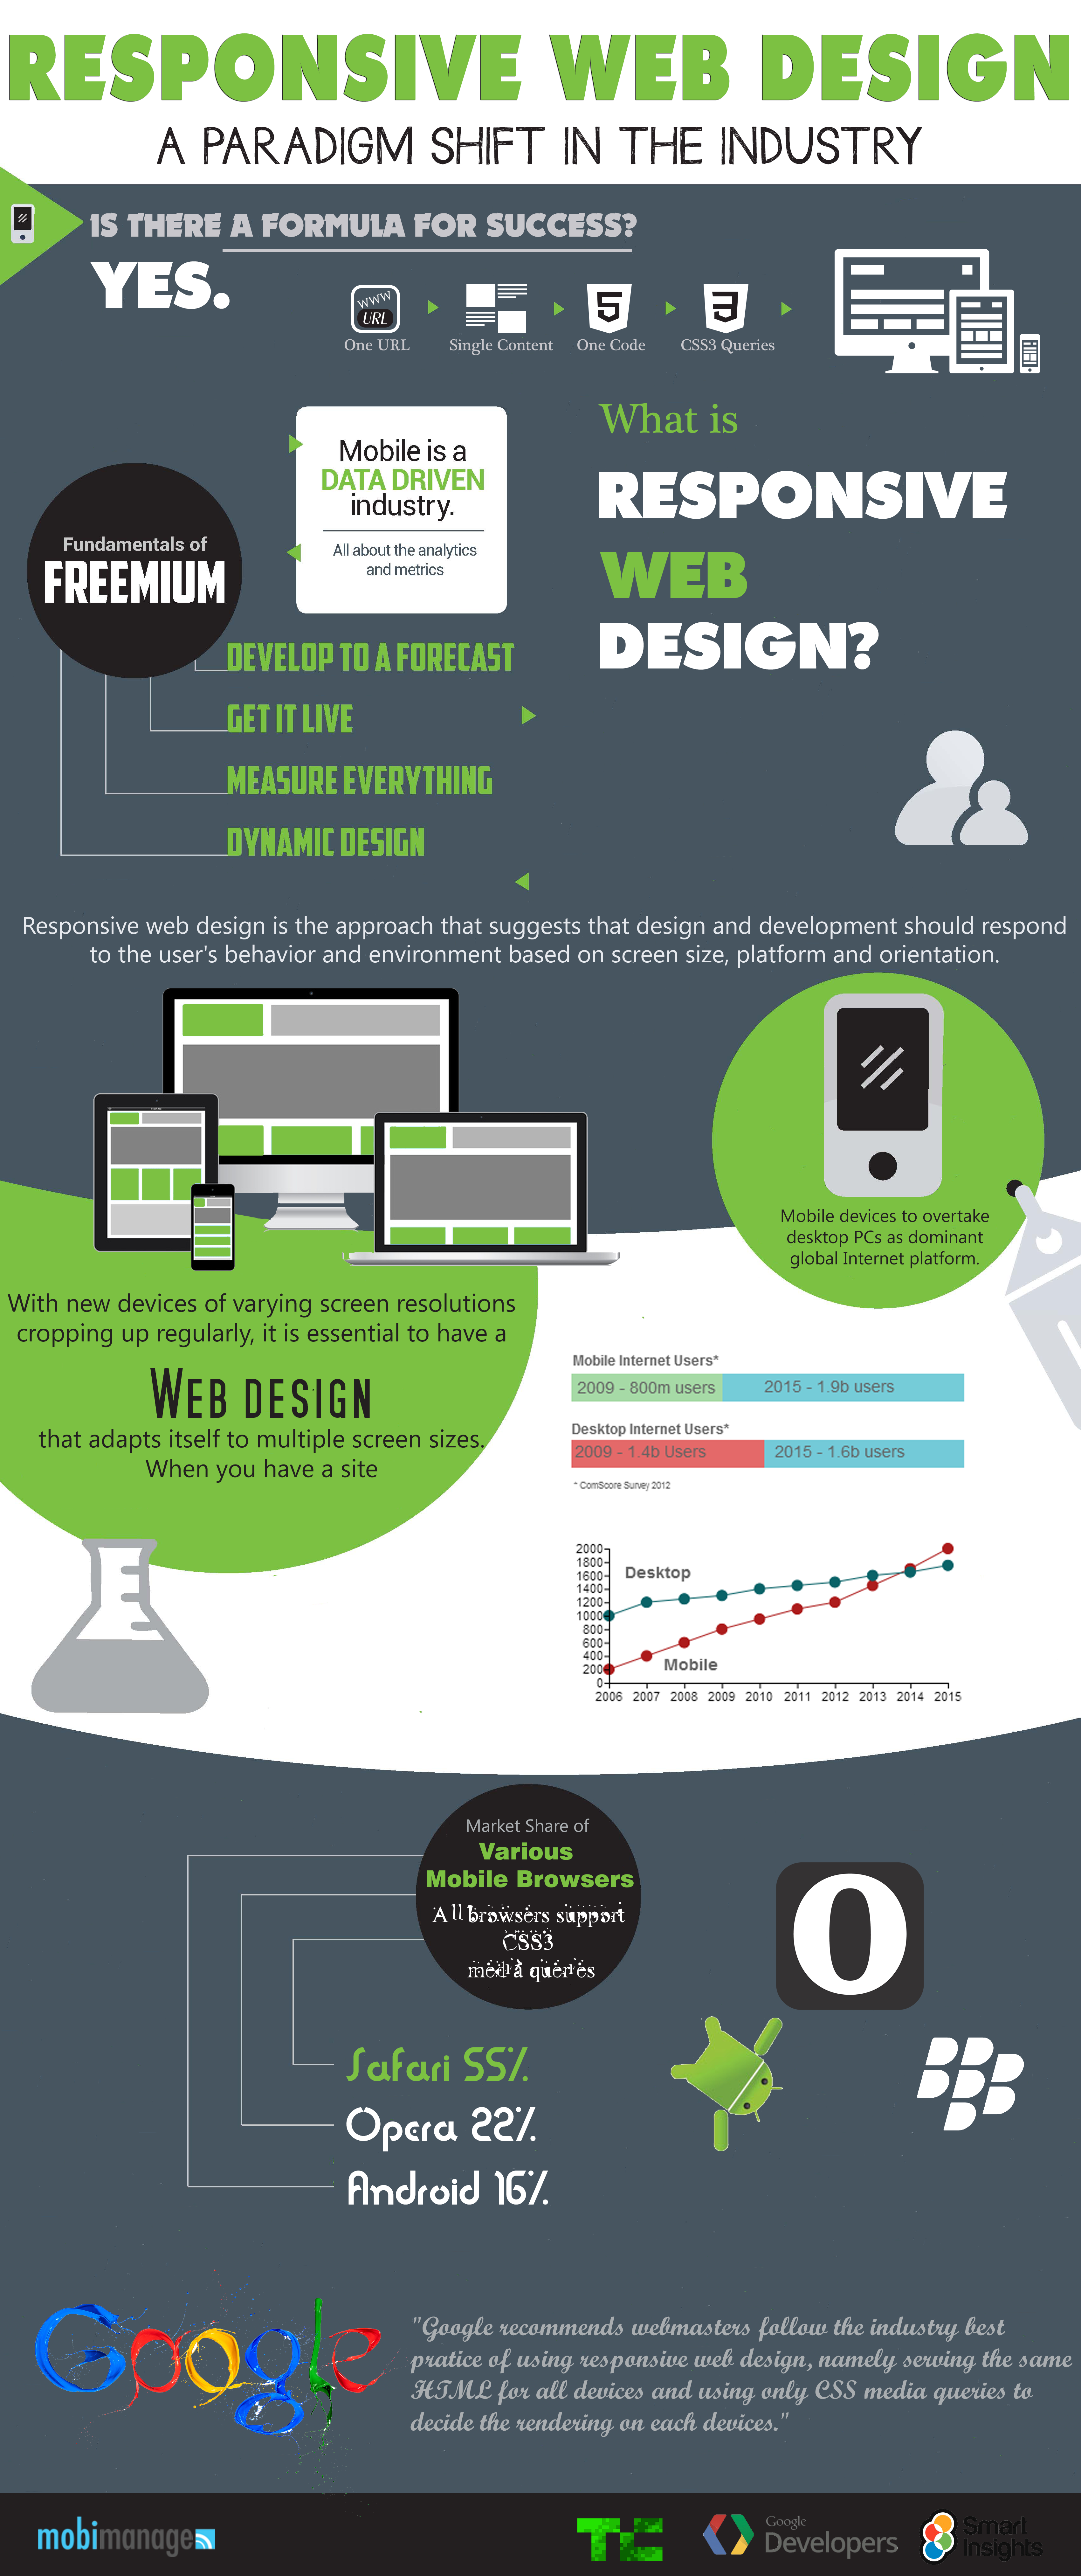 brand-responsive-web-design-a-paradigm-shift-in-the-industry_518a98f24be6a